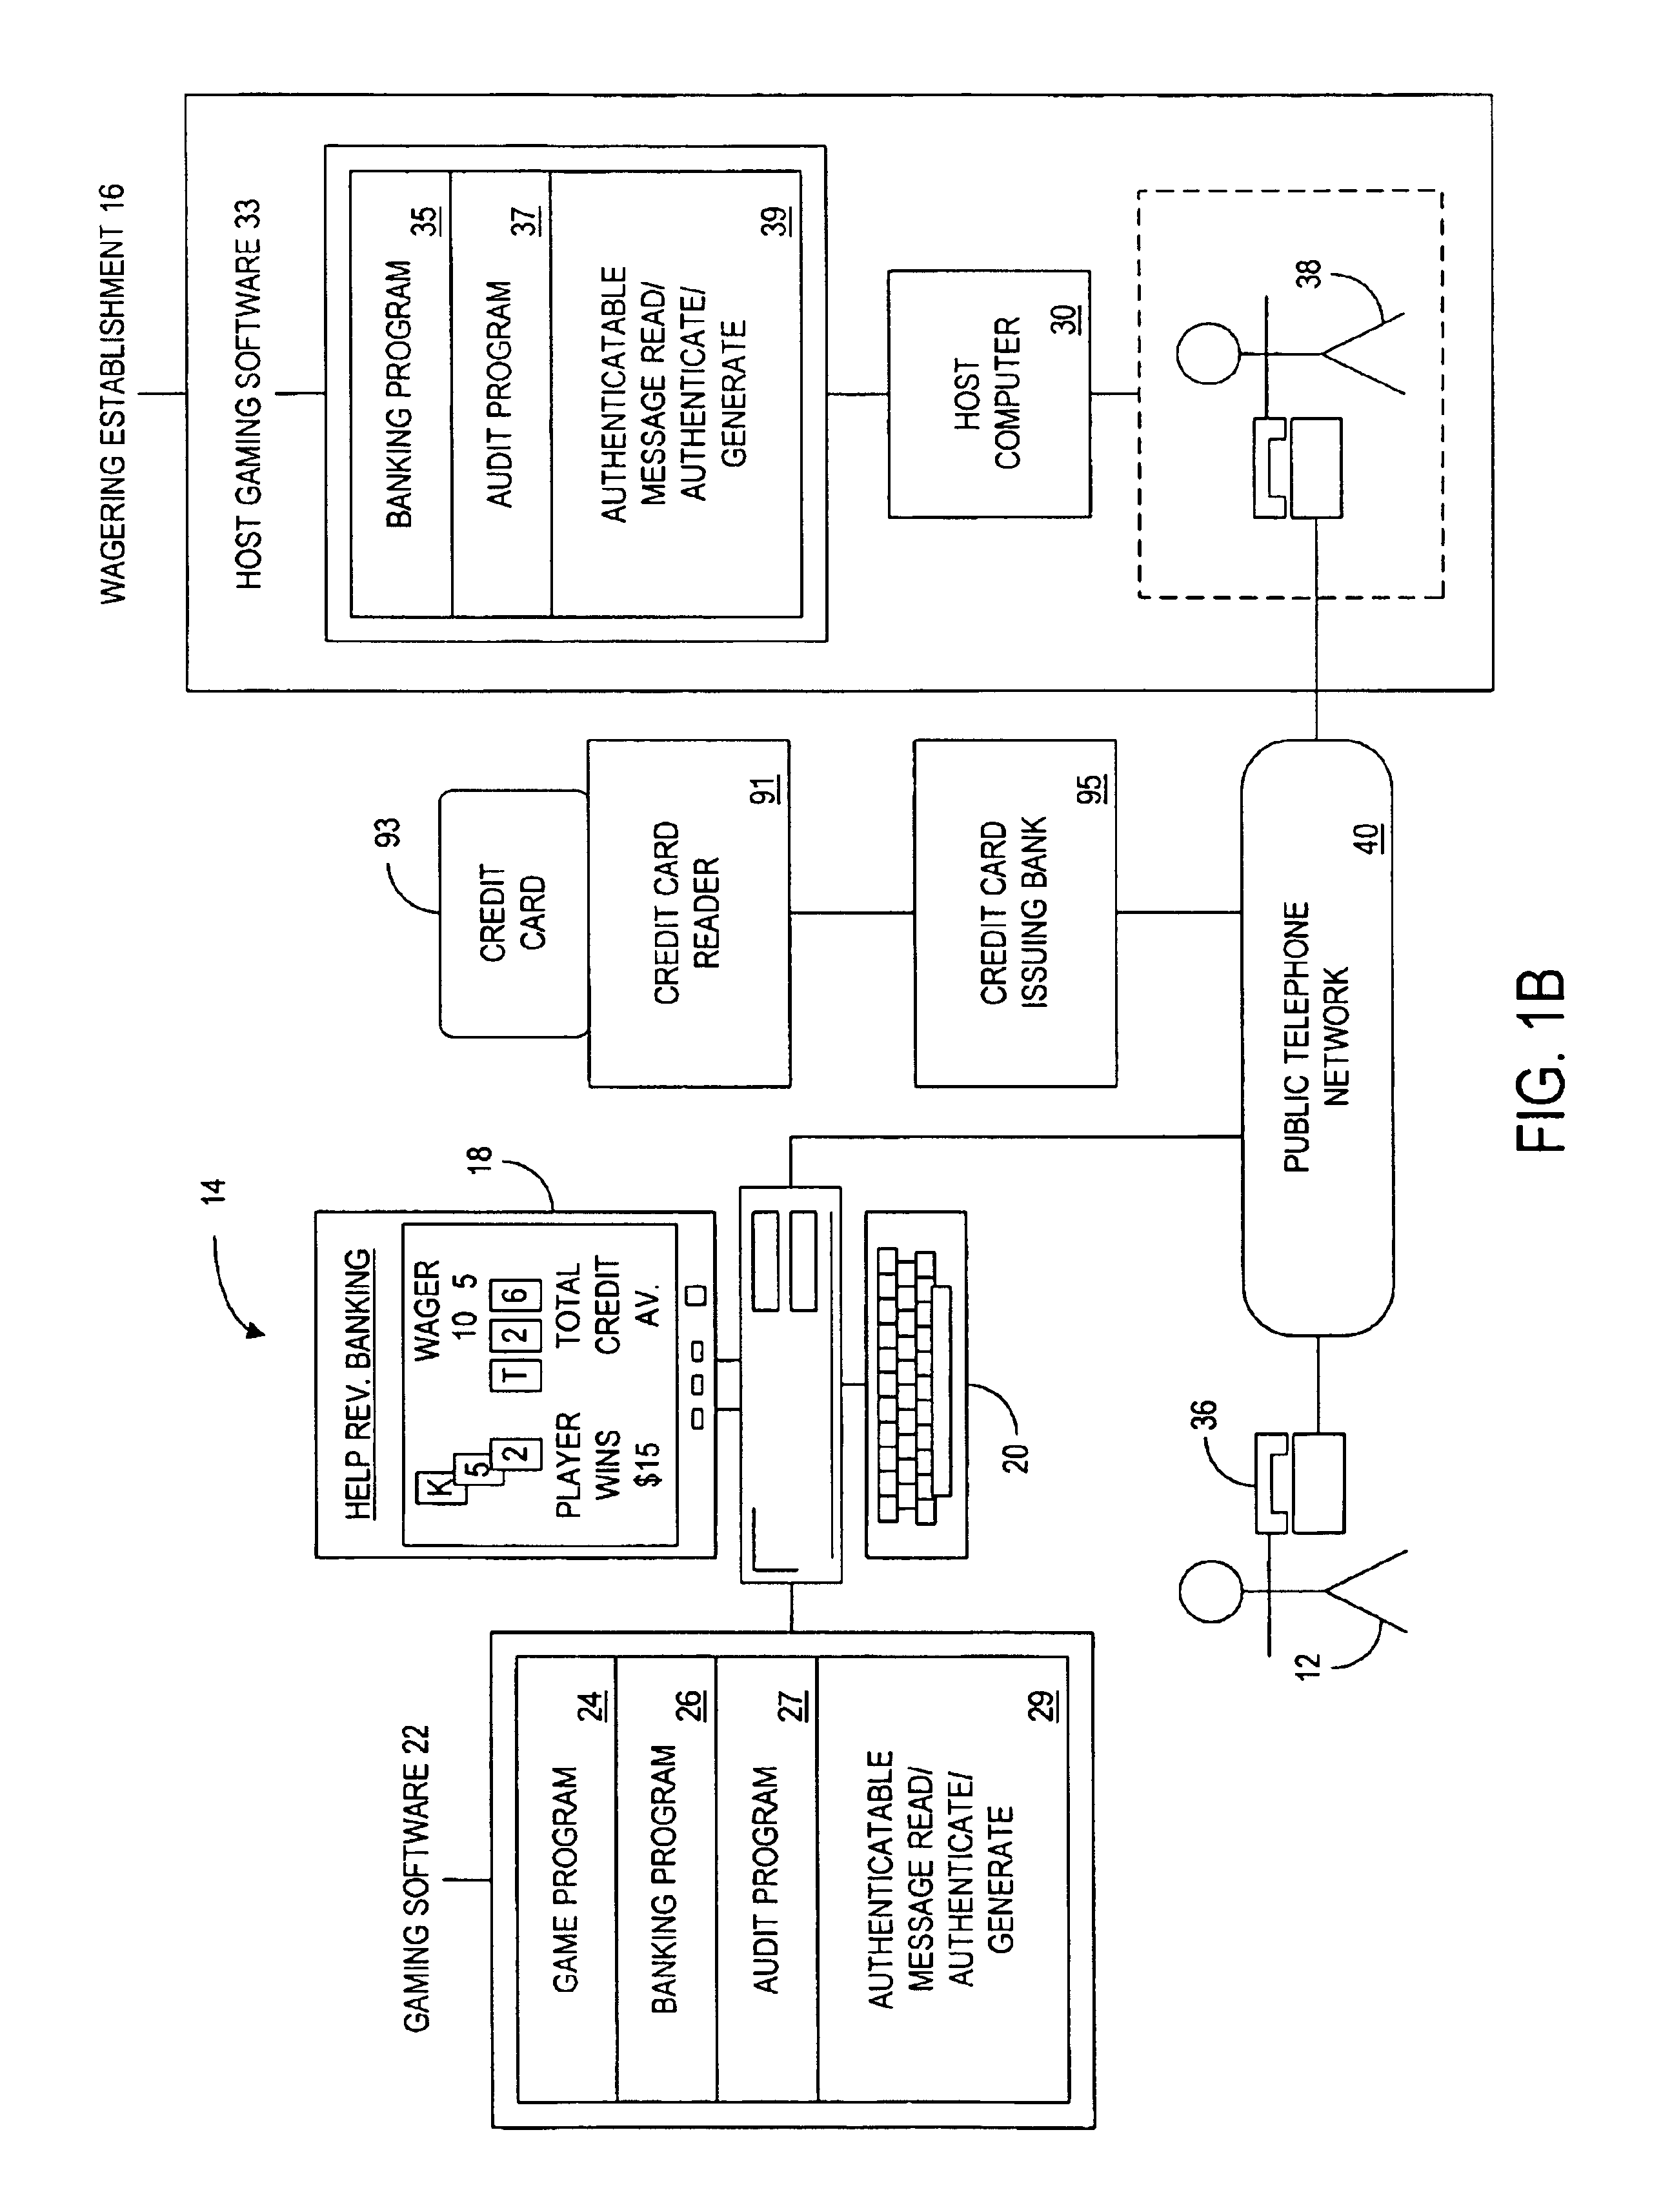 Method and apparatus for remote gaming